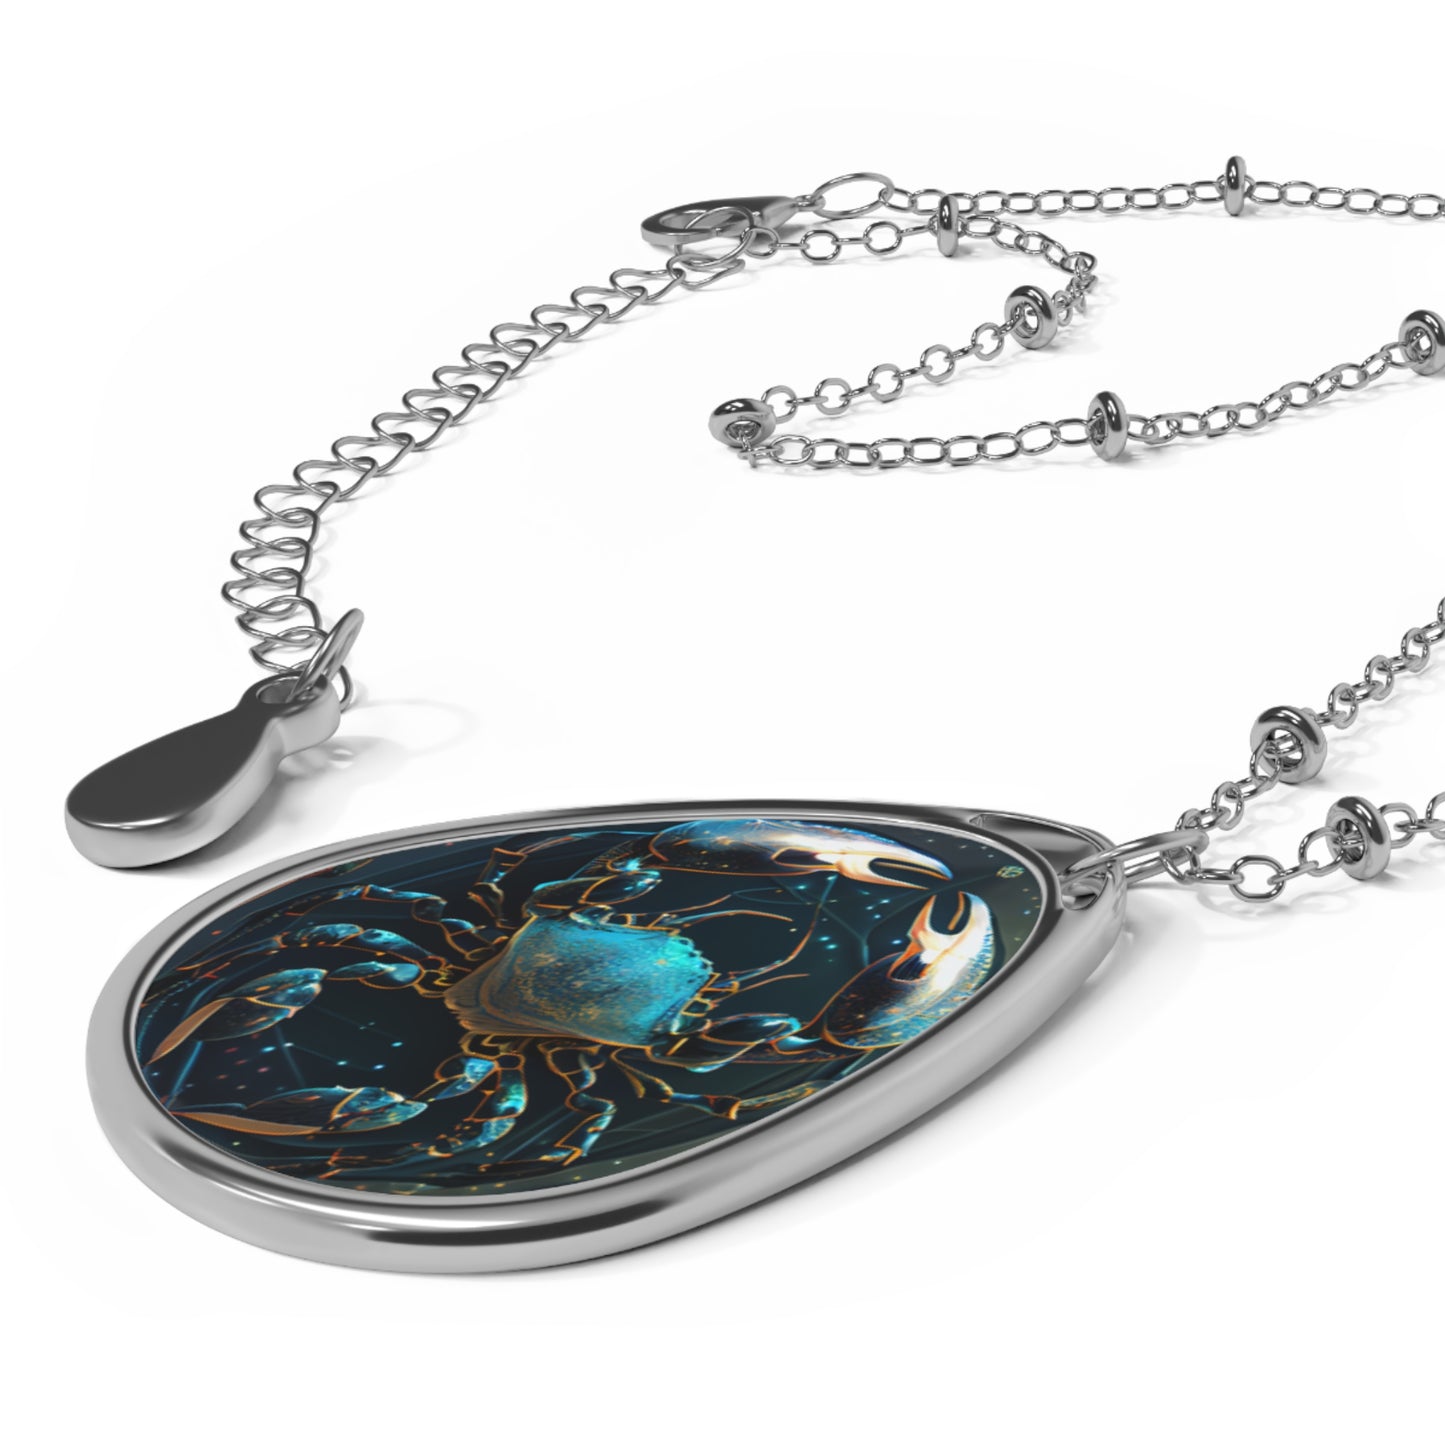 Cancer Zodiac Sign ~ Cancer the Crab in Blue ~ Necklace & Oval Pendant With Chain